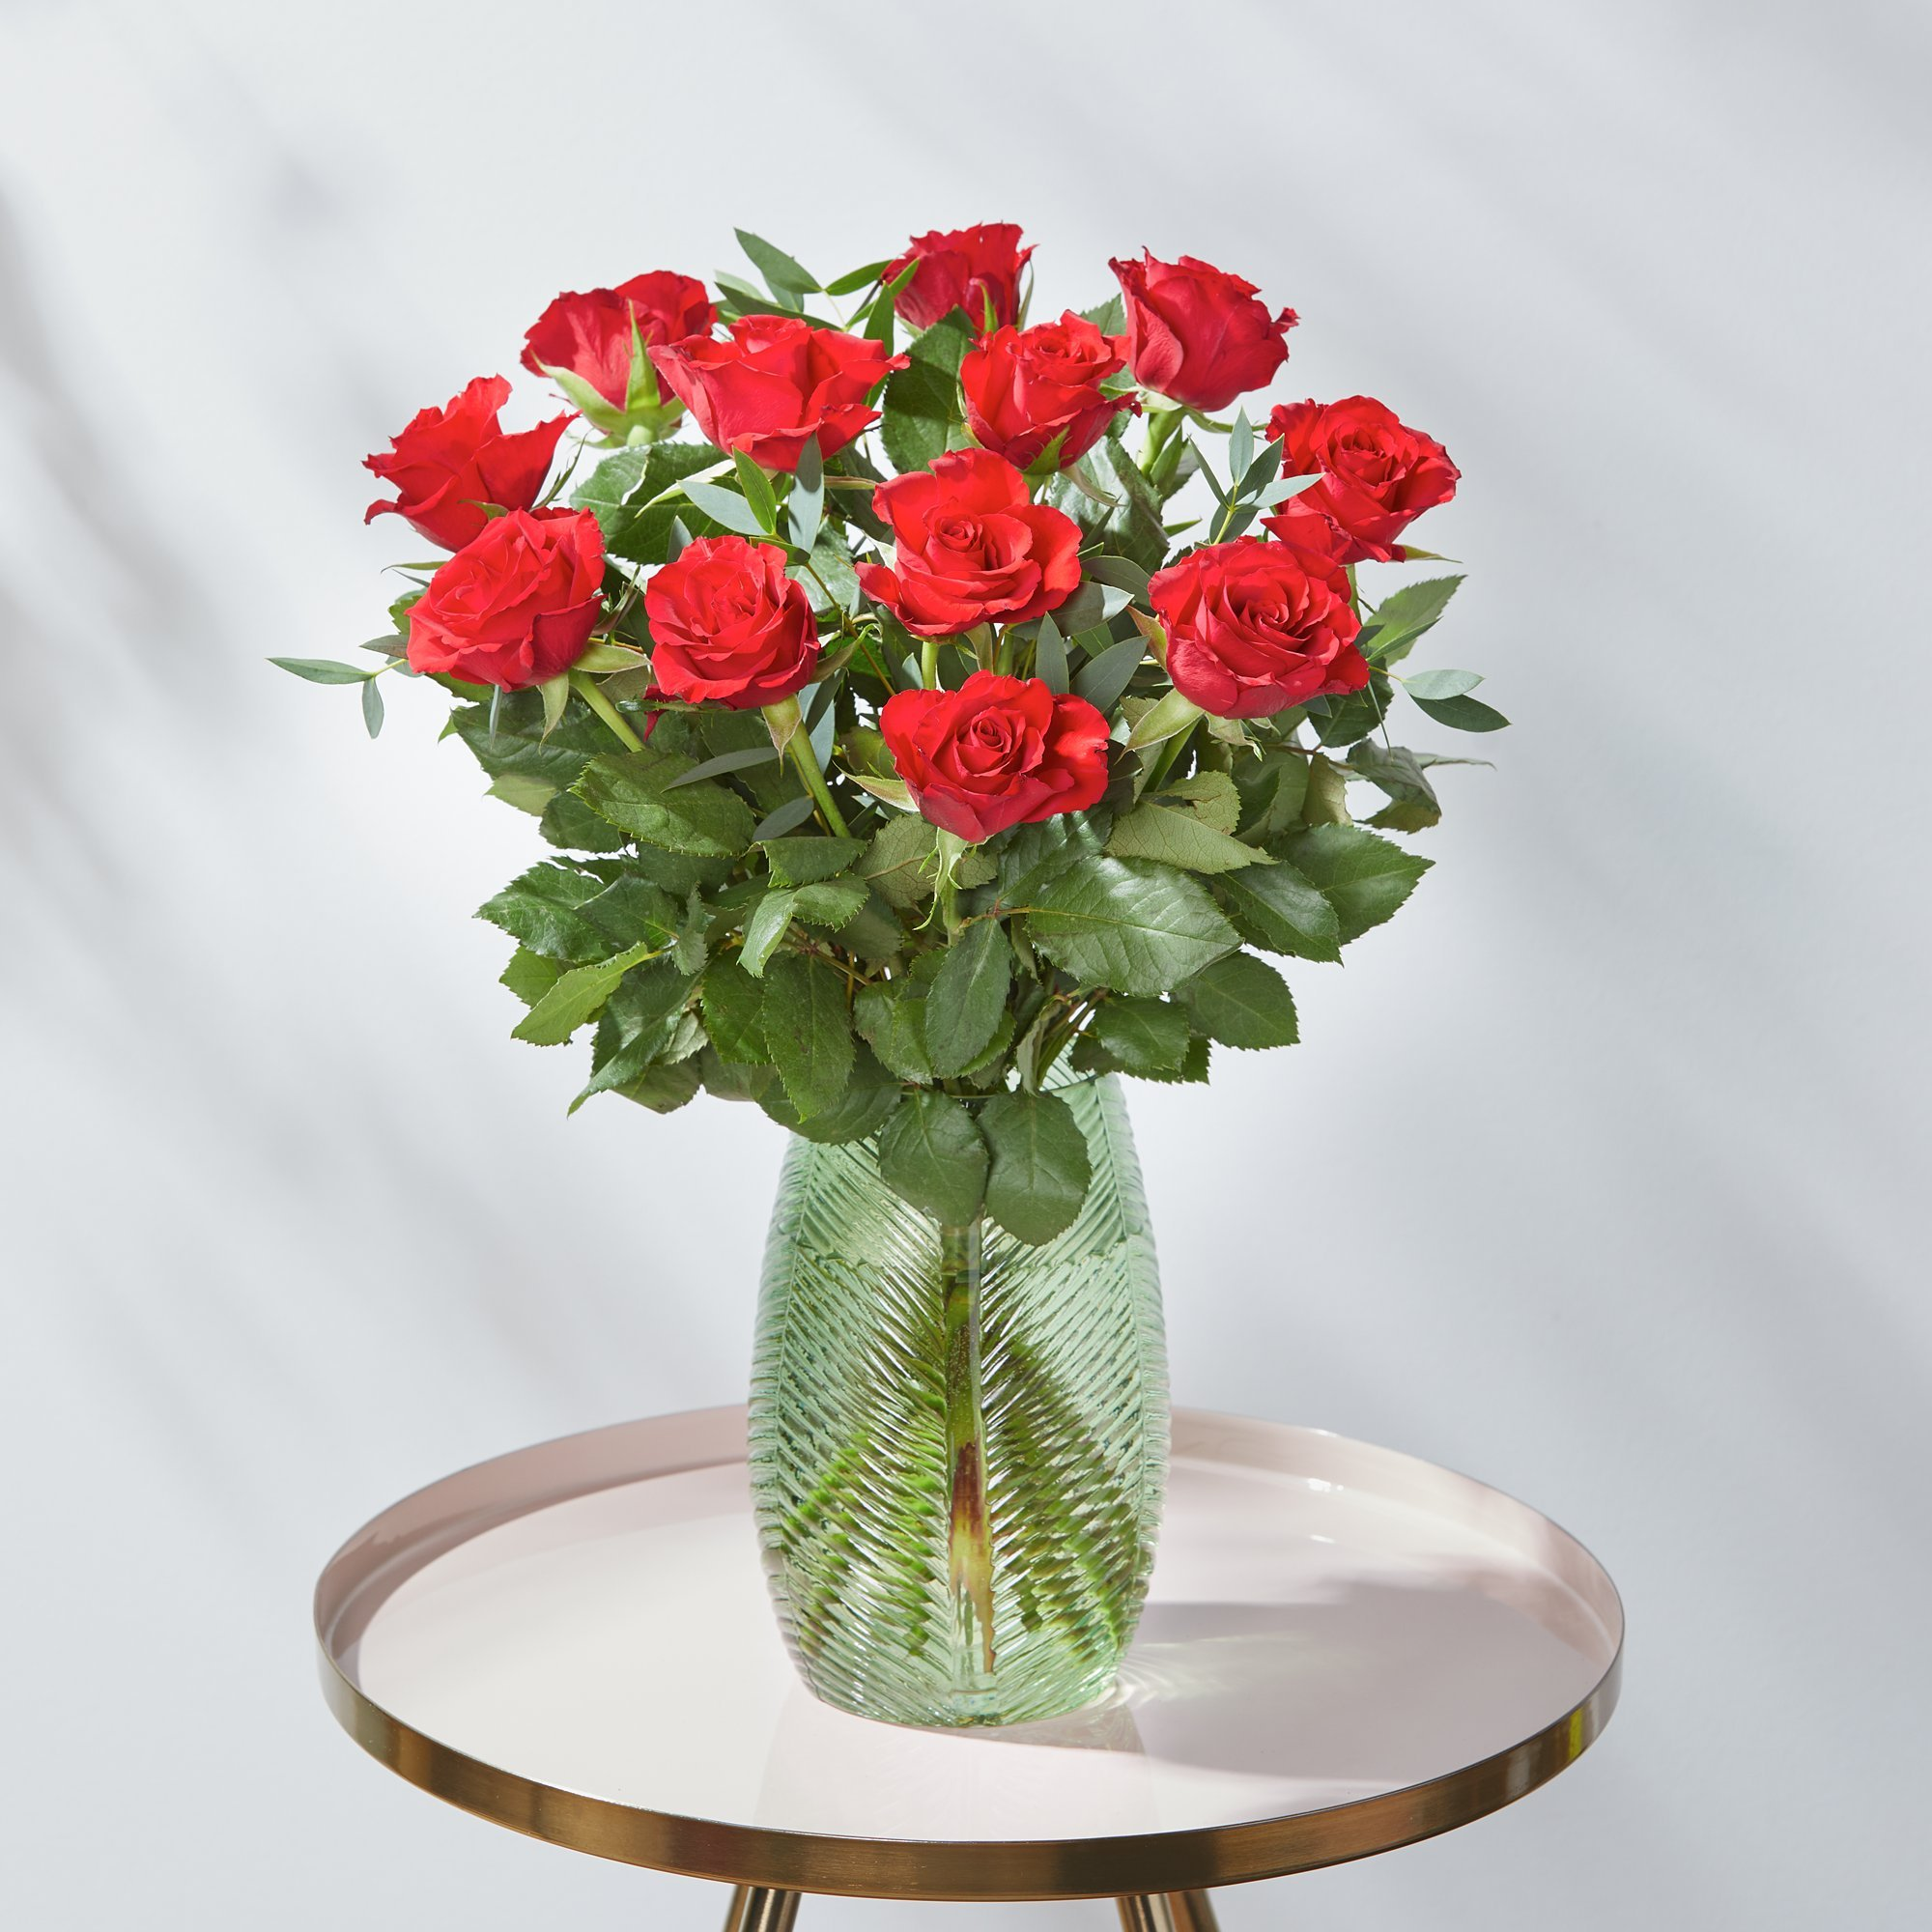 12 Red Roses image